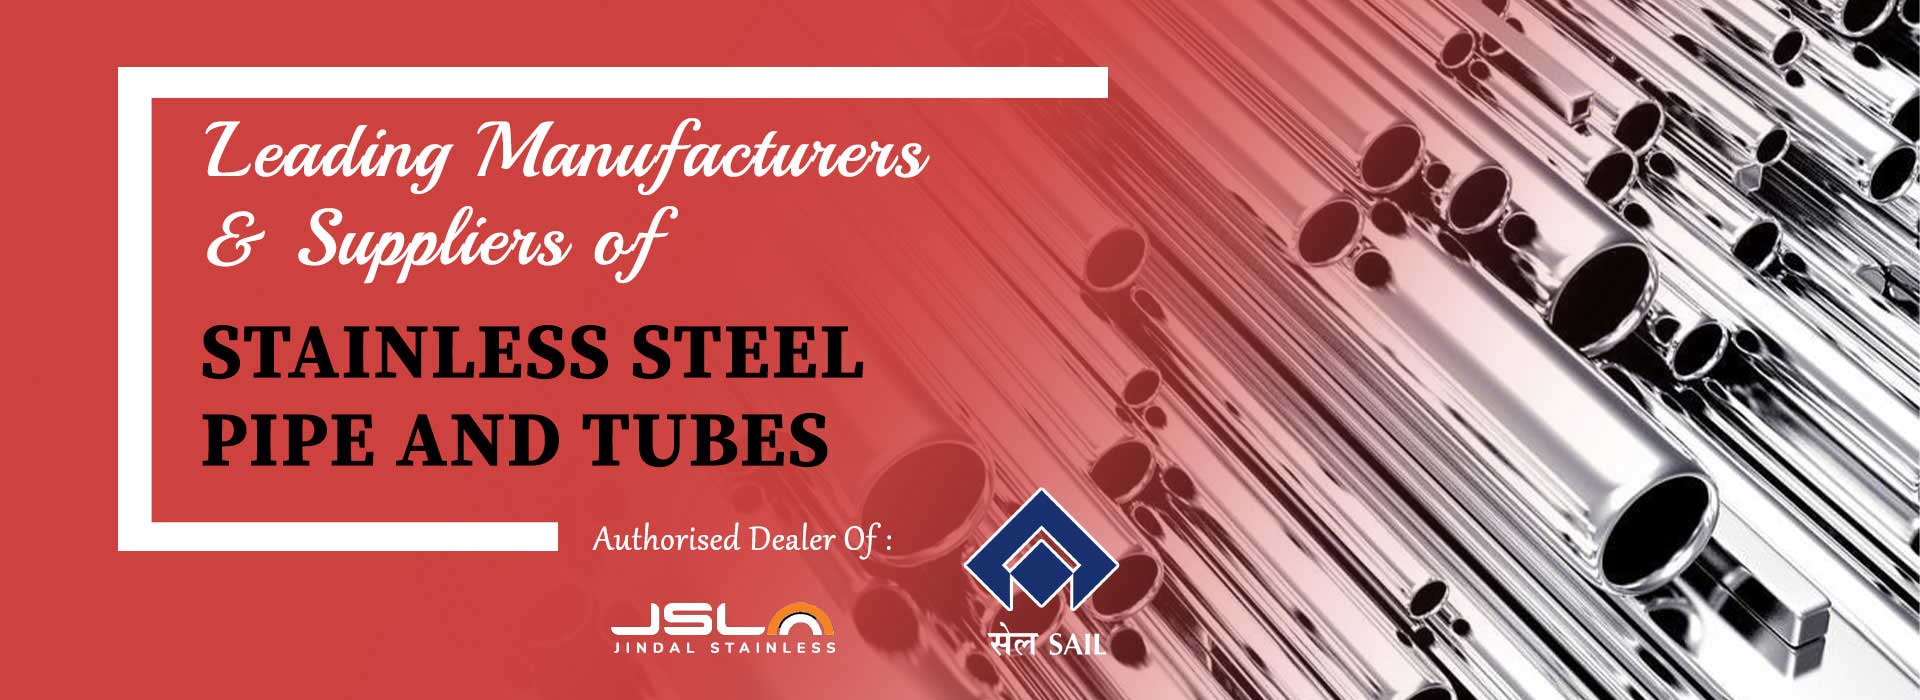 Stainless Steel Pipe and Tubes Manufacturers in Kanpur